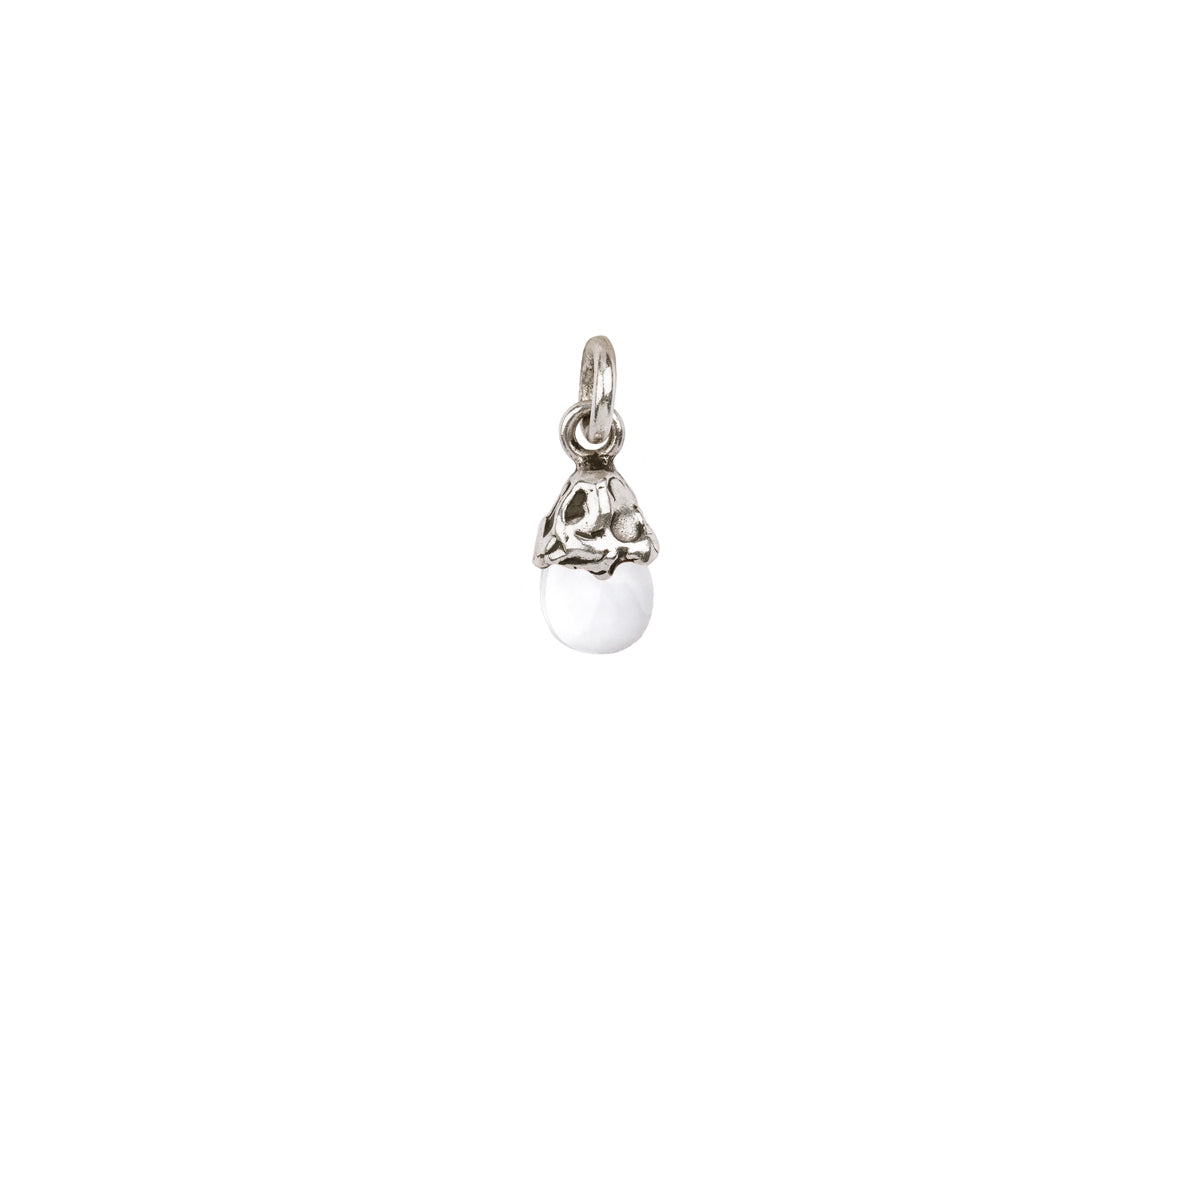 A sterling silver attraction charm capped with a clear quartz stone.